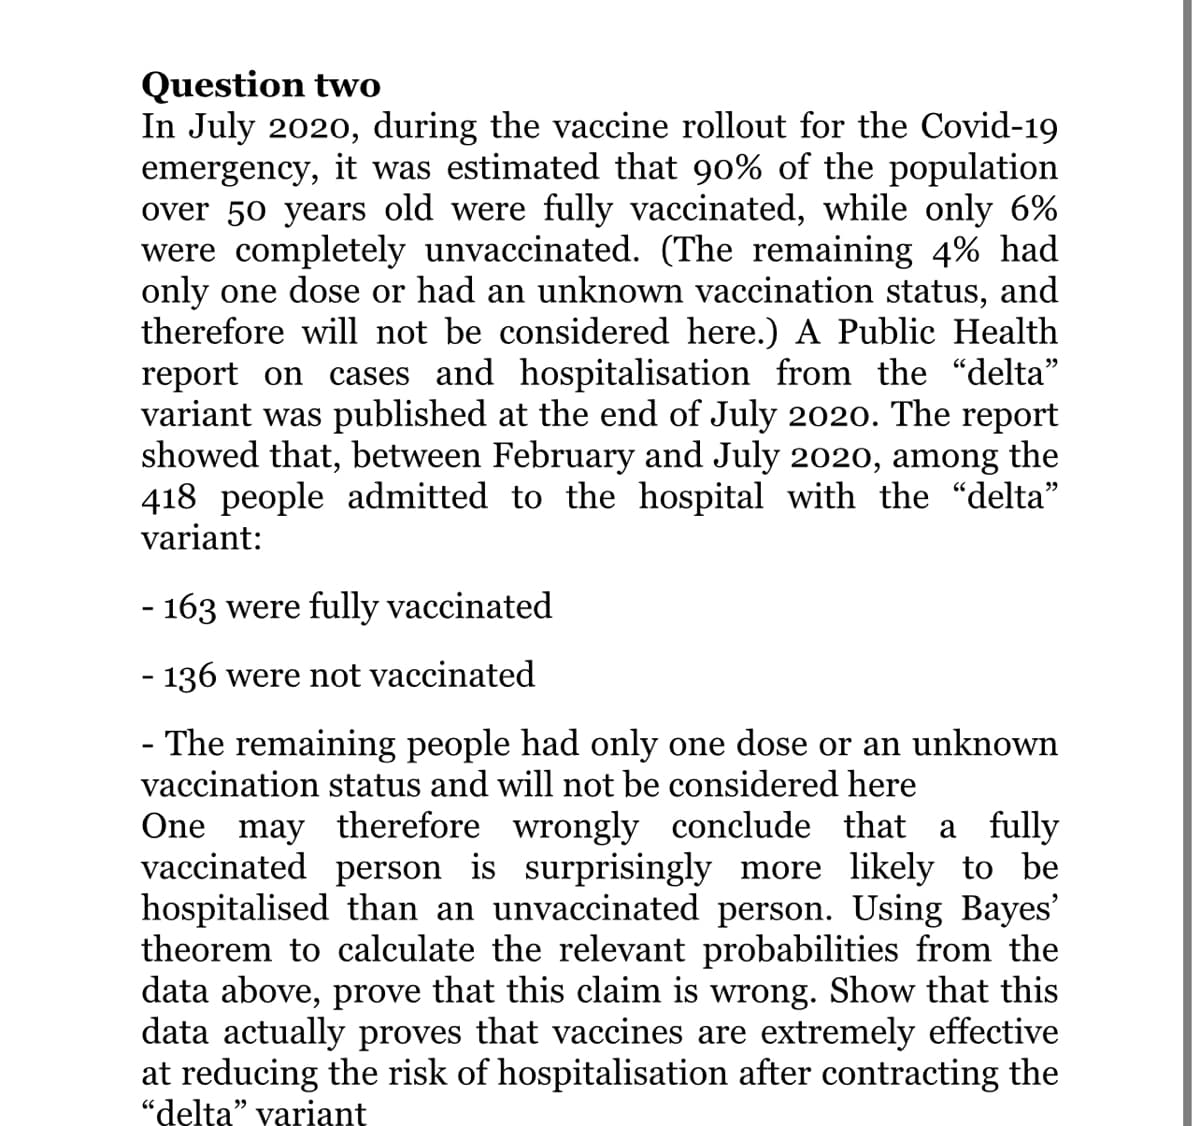 Question two
In July 2020, during the vaccine rollout for the Covid-19
emergency, it was estimated that 90% of the population
over 50 years old were fully vaccinated, while only 6%
were completely unvaccinated. (The remaining 4% had
only one dose or had an unknown vaccination status, and
therefore will not be considered here.) A Public Health
report on cases and hospitalisation from the "delta"
variant was published at the end of July 2020. The report
showed that, between February and July 2020, among the
418 people admitted to the hospital with the "delta"
variant:
- 163 were fully vaccinated
- 136 were not vaccinated
- The remaining people had only one dose or an unknown
vaccination status and will not be considered here
One may therefore wrongly conclude that a fully
vaccinated person is surprisingly more likely to be
hospitalised than an unvaccinated person. Using Bayes'
theorem to calculate the relevant probabilities from the
data above, prove that this claim is wrong. Show that this
data actually proves that vaccines are extremely effective
at reducing the risk of hospitalisation after contracting the
"delta" variant